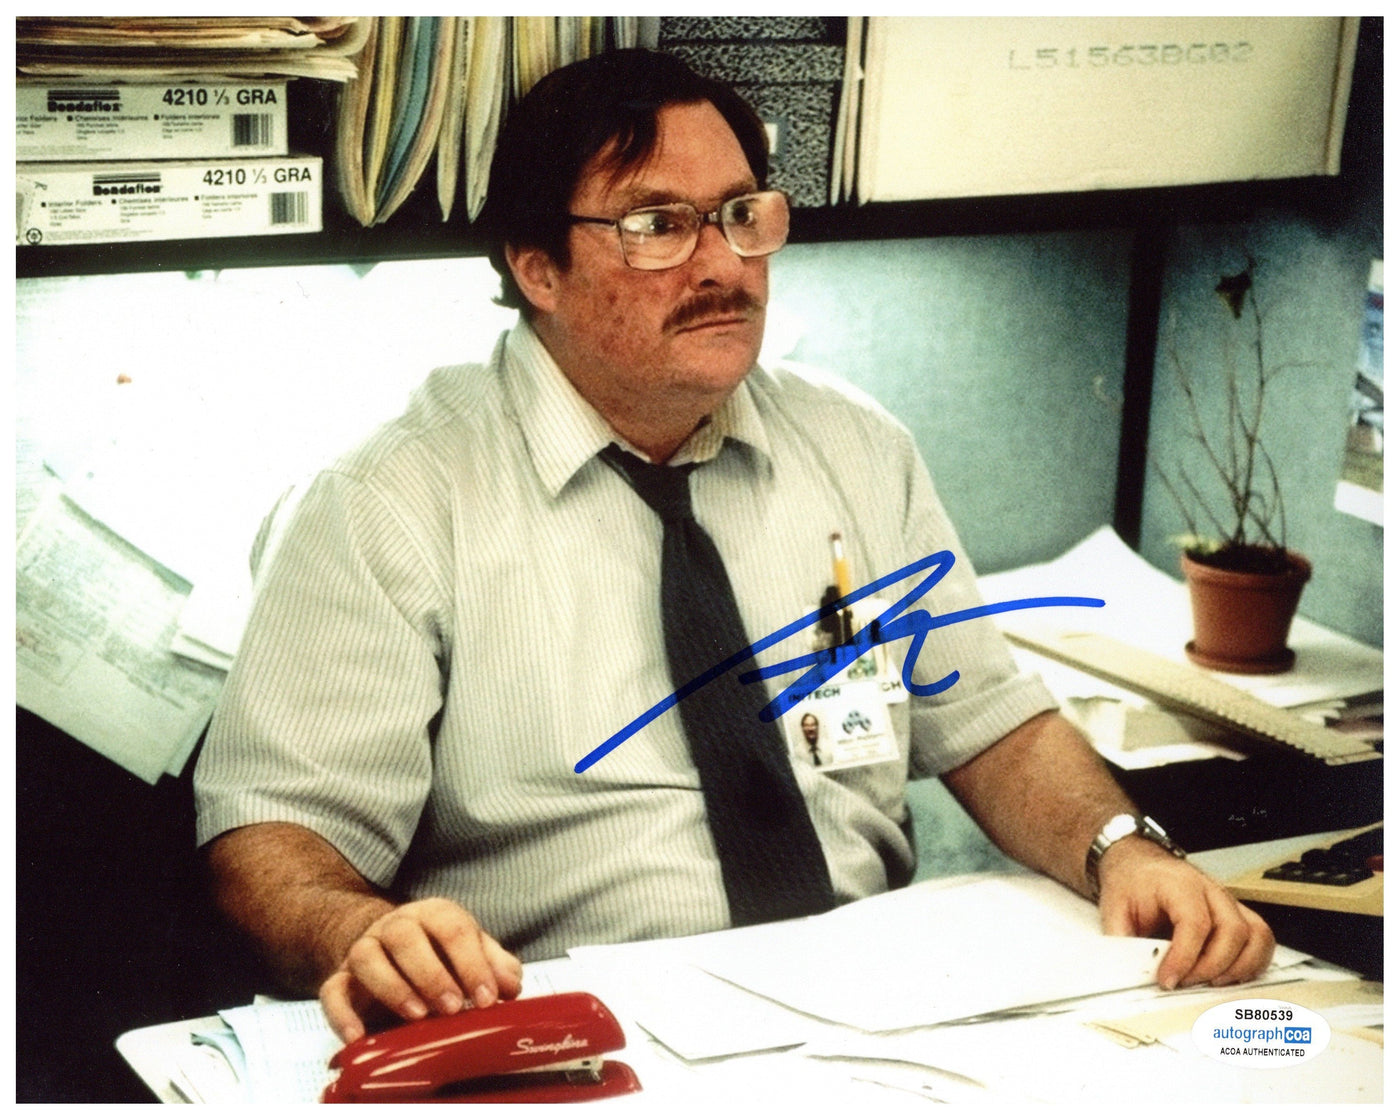 Stephen Root Signed 8x10 Photo Office Space Autographed ACOA #4